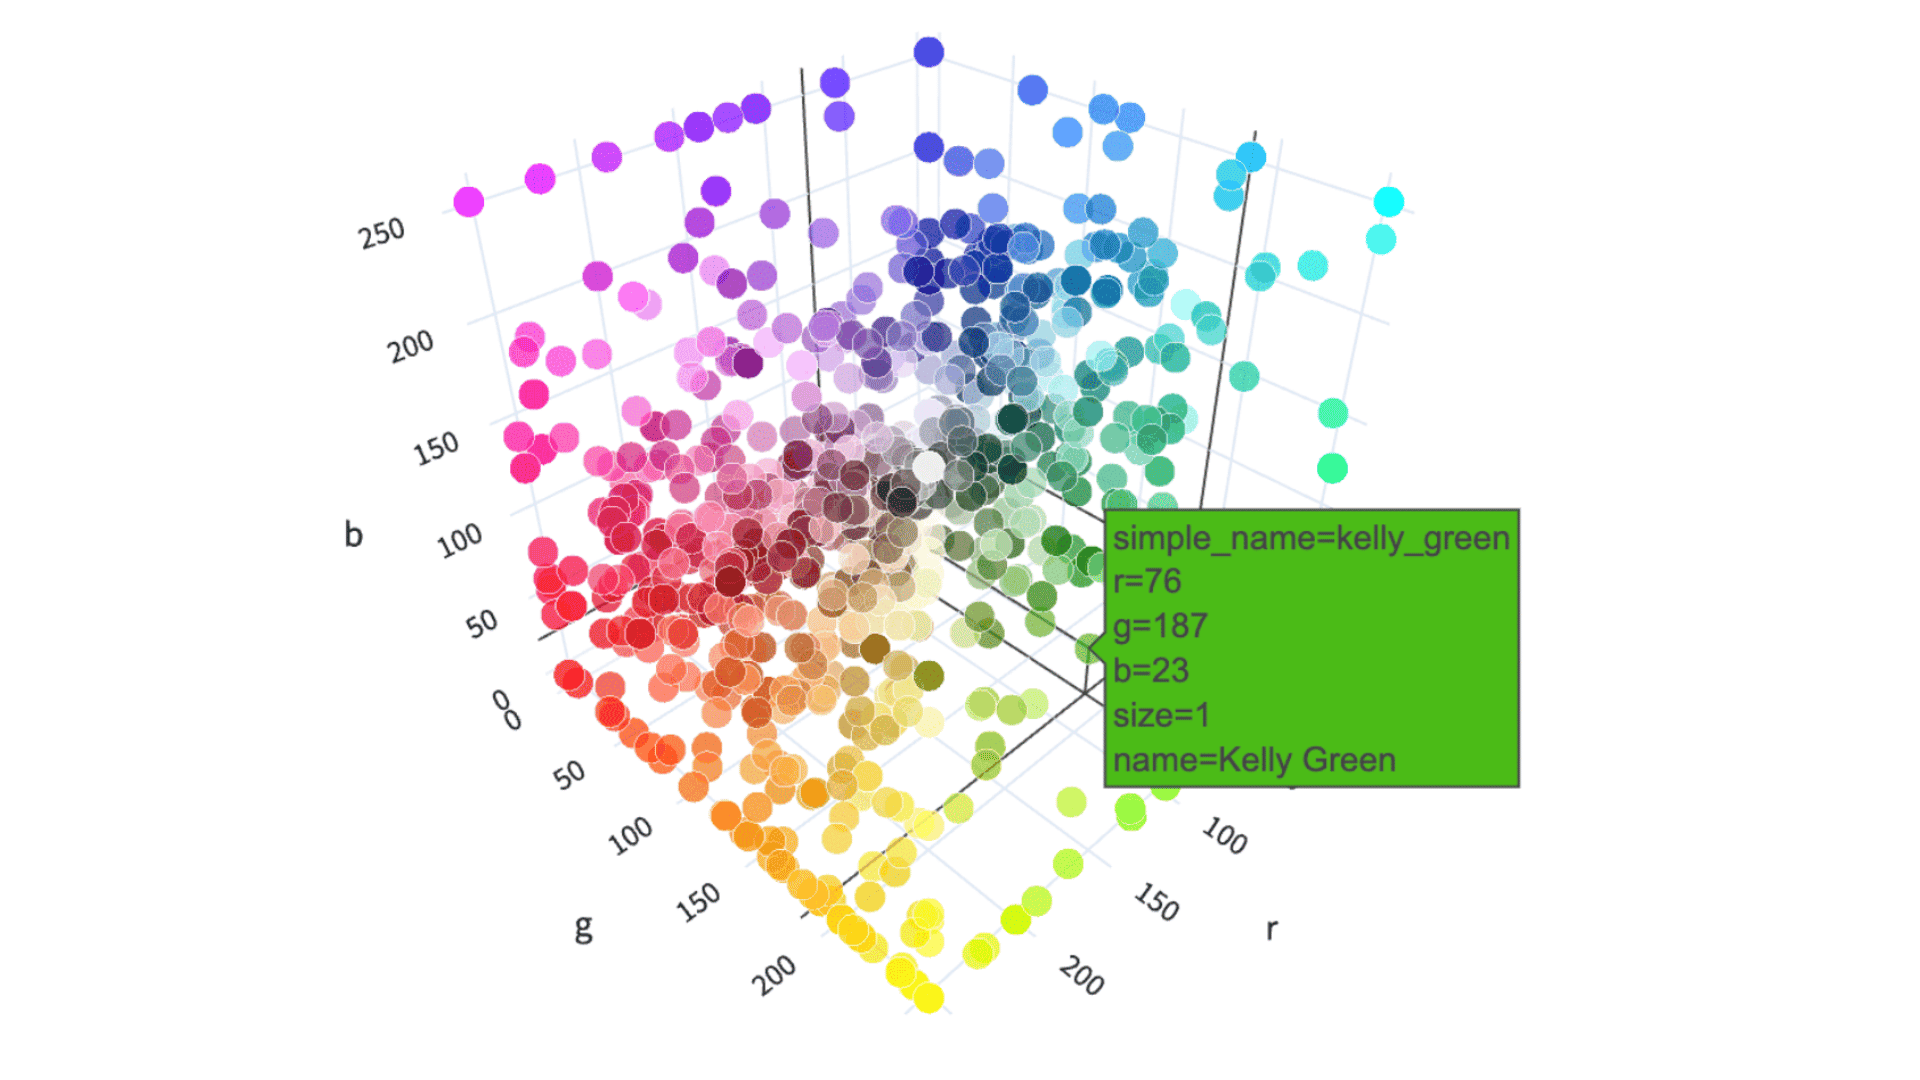 In a 3-D space, colors are represented as vectors to illustrate the grouping of similar items based on their vector representations.